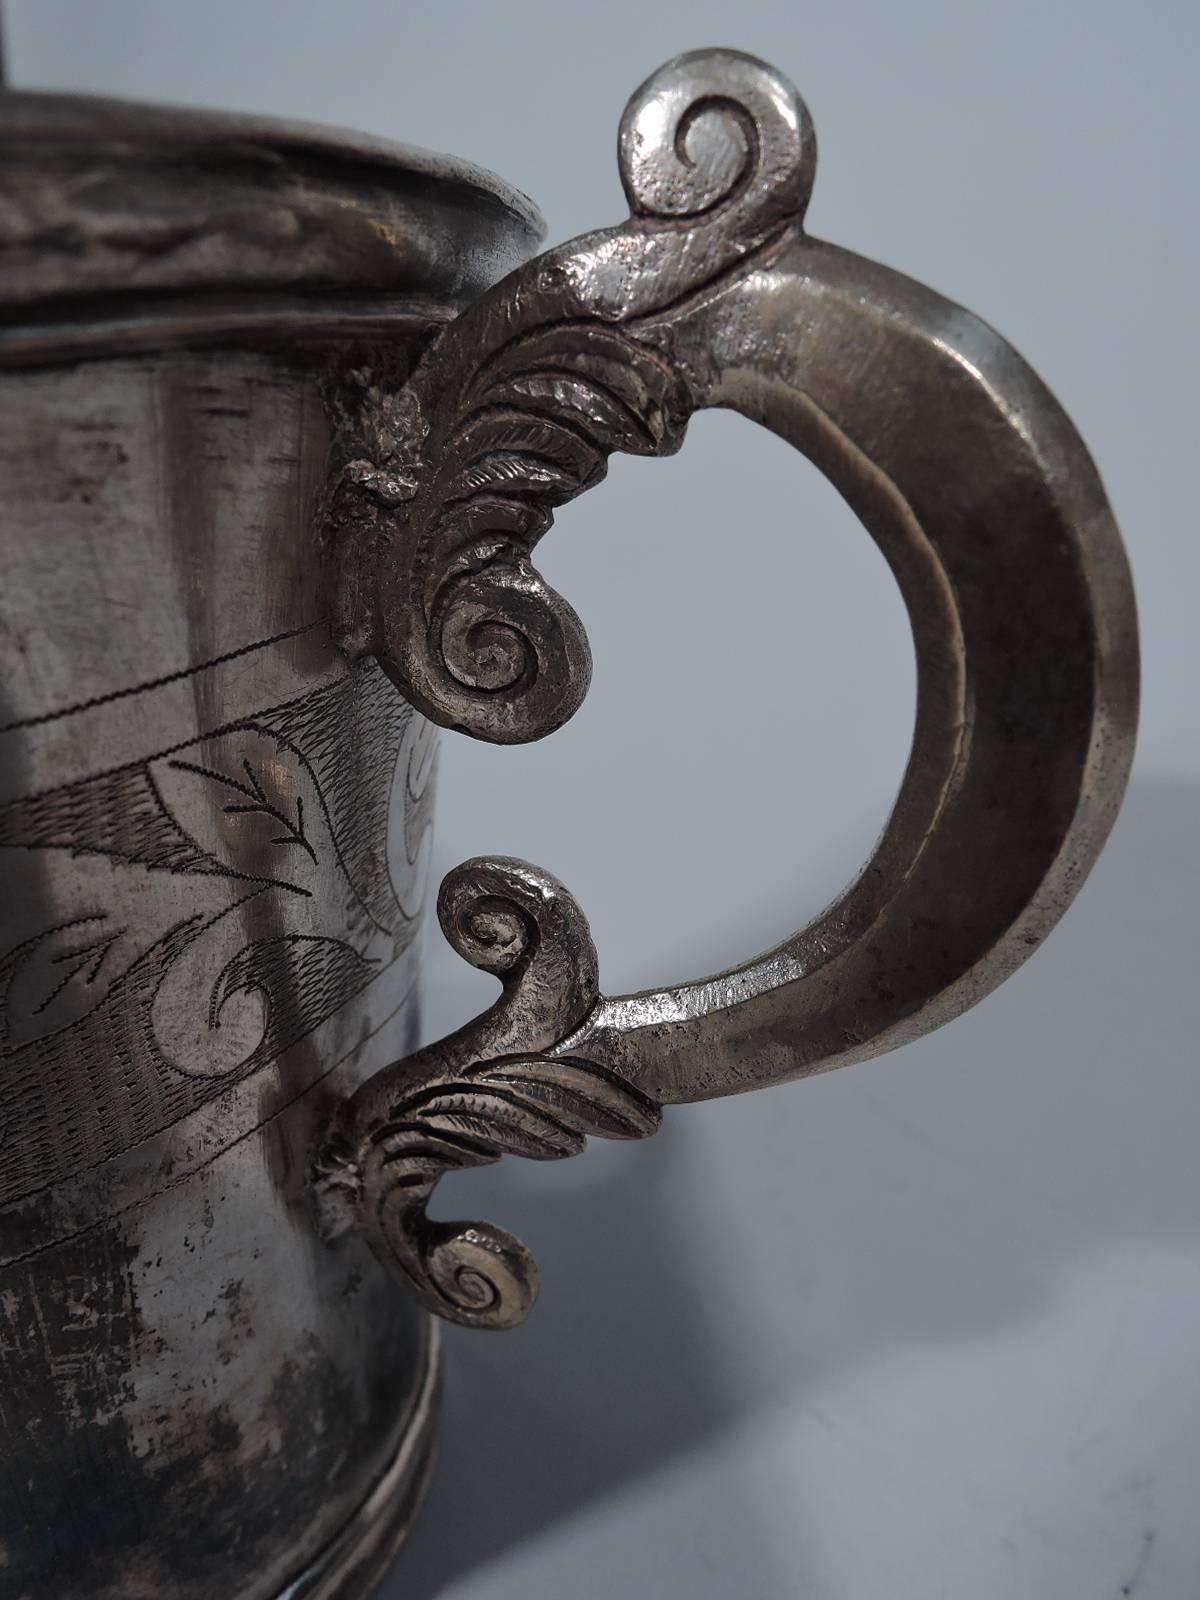 Spanish Colonial Antique South American Silver Mug with Scrolls and Leaves